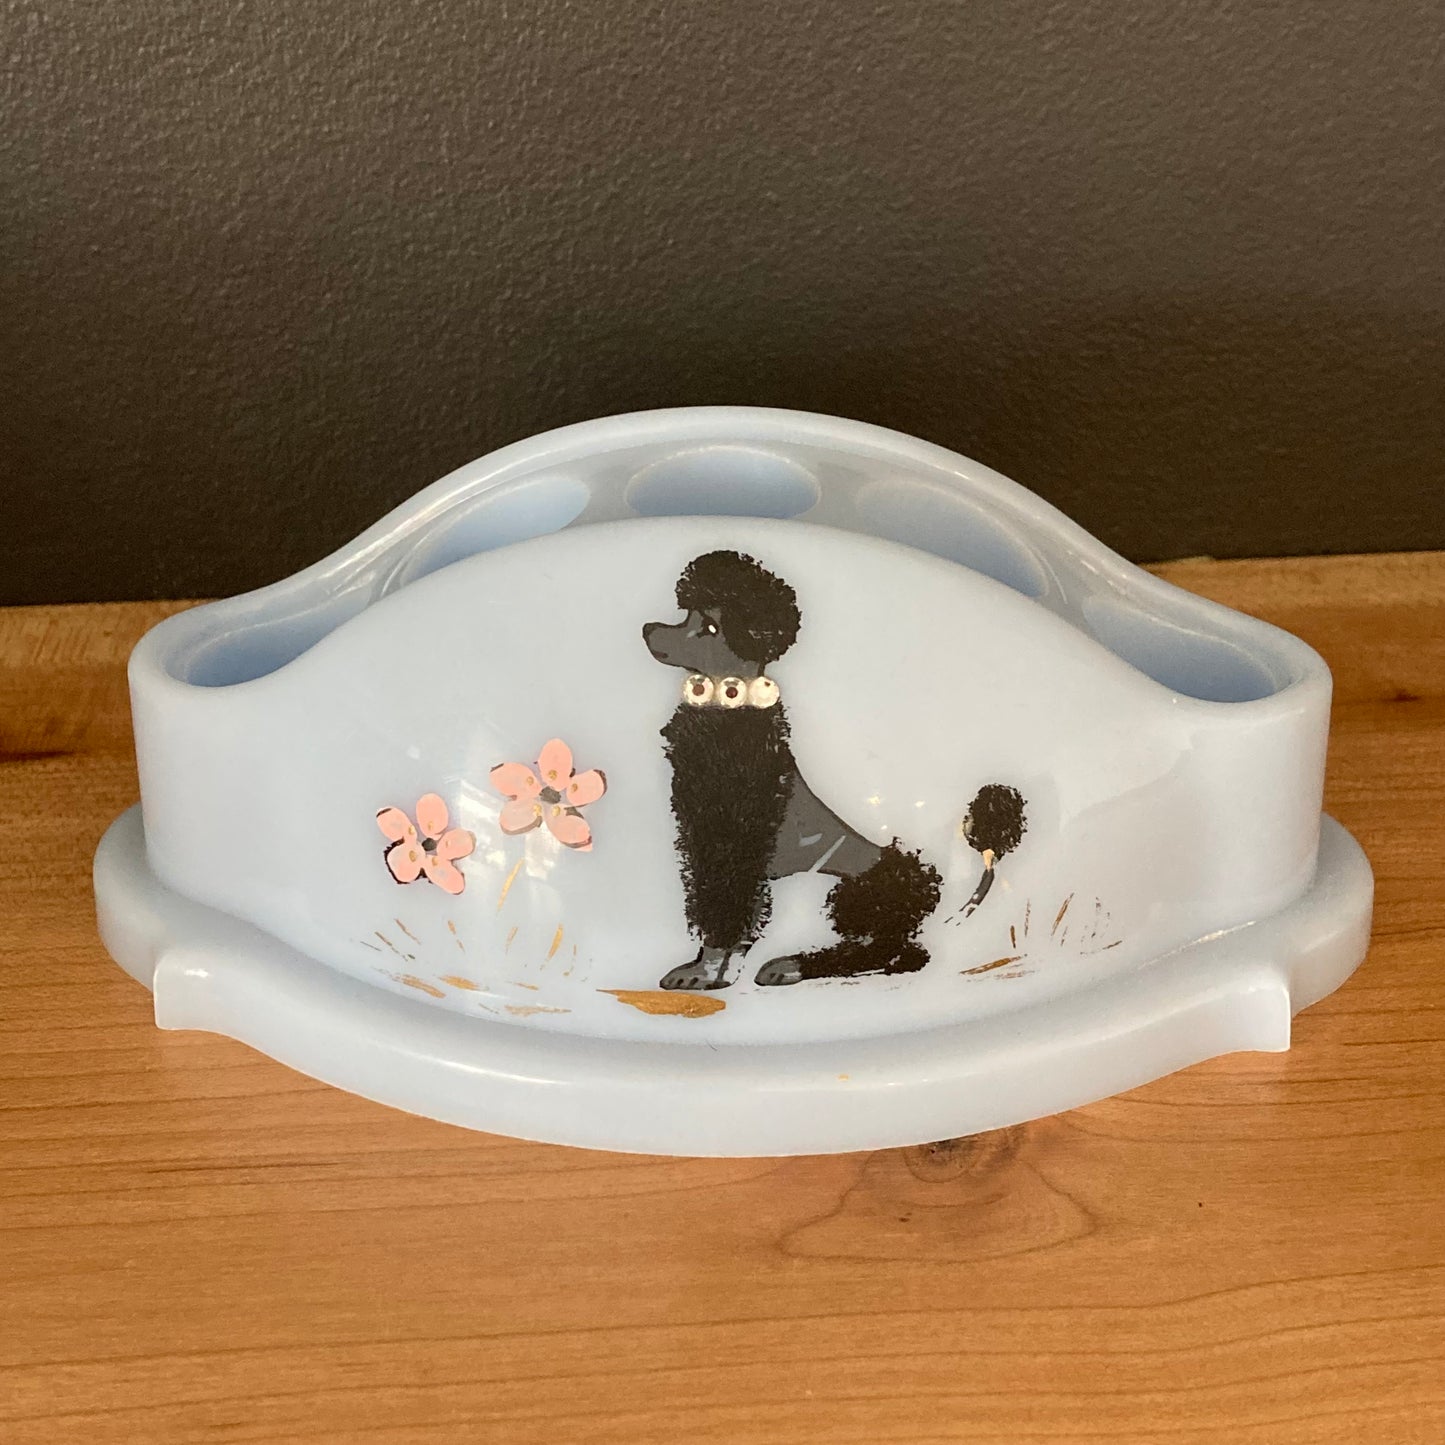 1950s Plastic Lipstick Holder with Poodle and Flowers by Shari